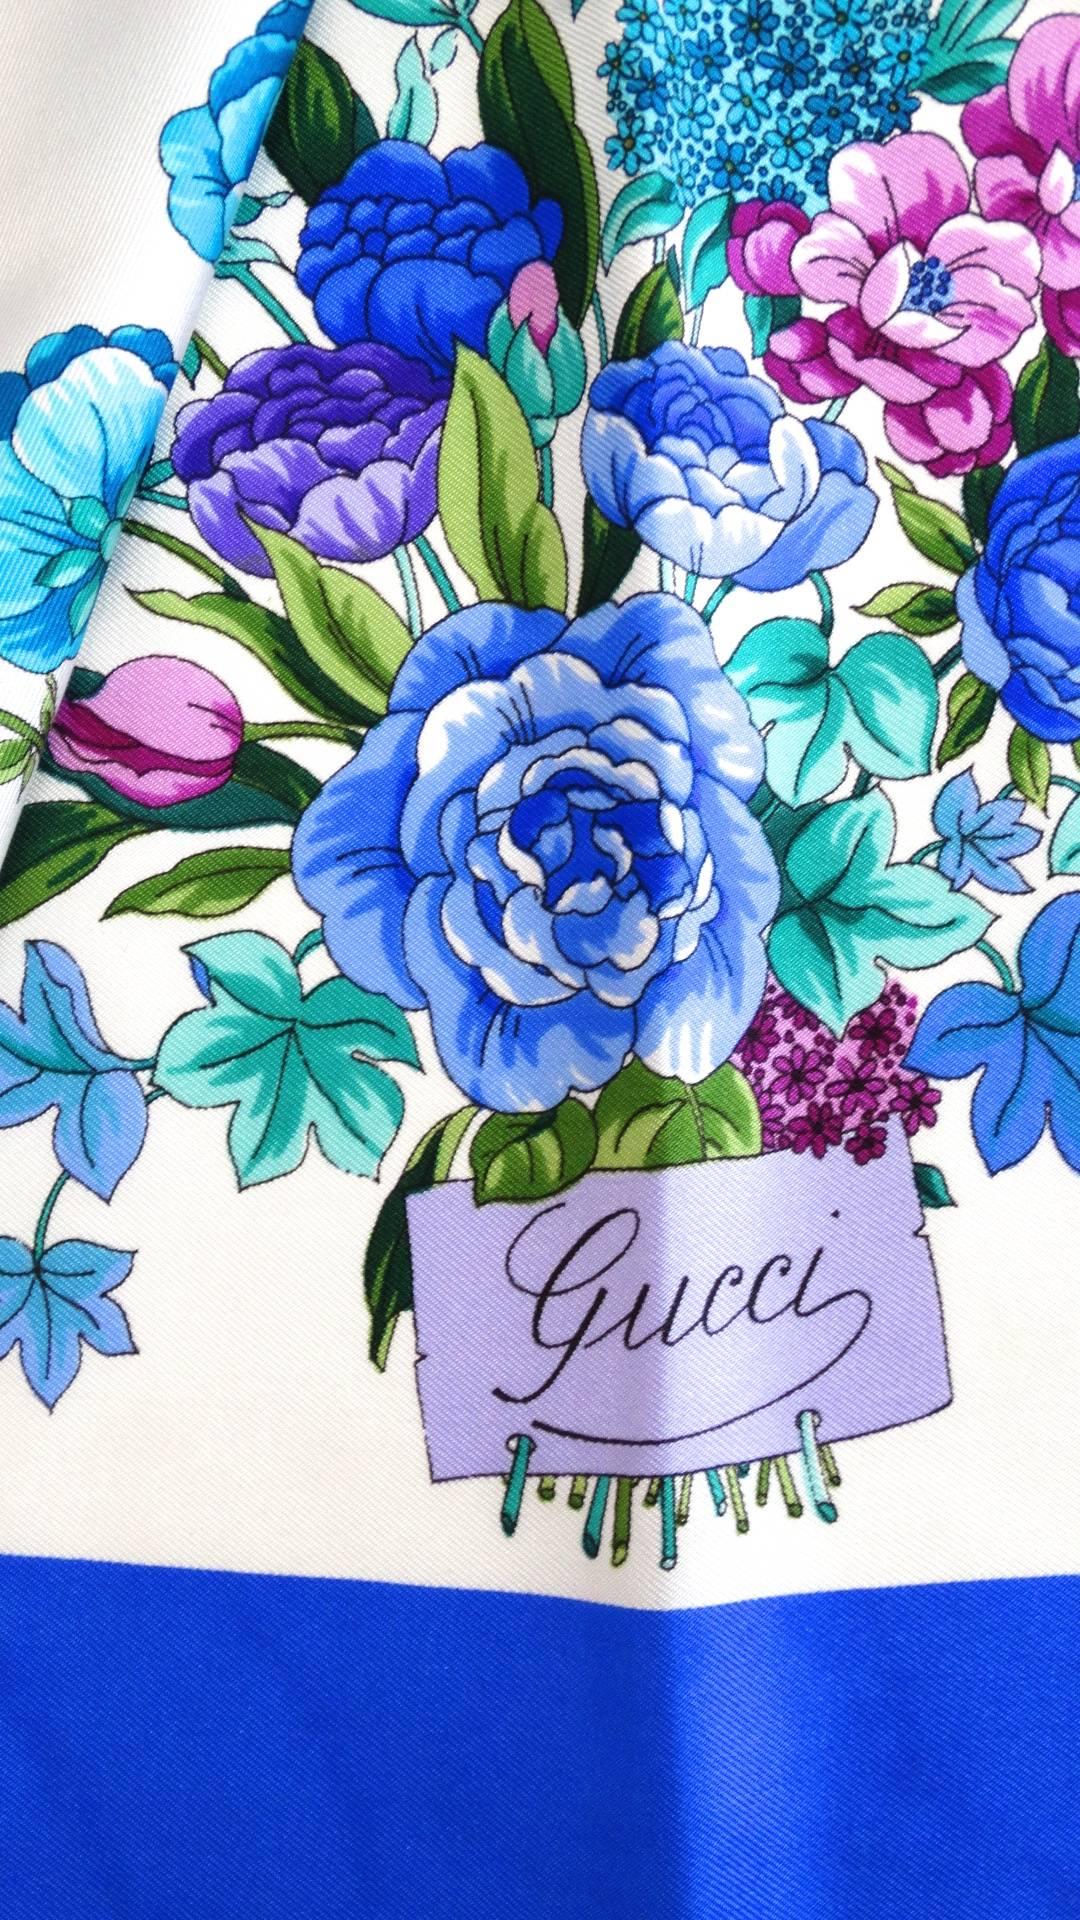 Rock a statement scarf with our incredible 1980s Gucci blue floral silk scarf! Solf silk fabric printed with a brilliant floral pattern in shades of teal, violet, and true blue. Trimmed with a thick blue border. Classic Gucci cursive signature